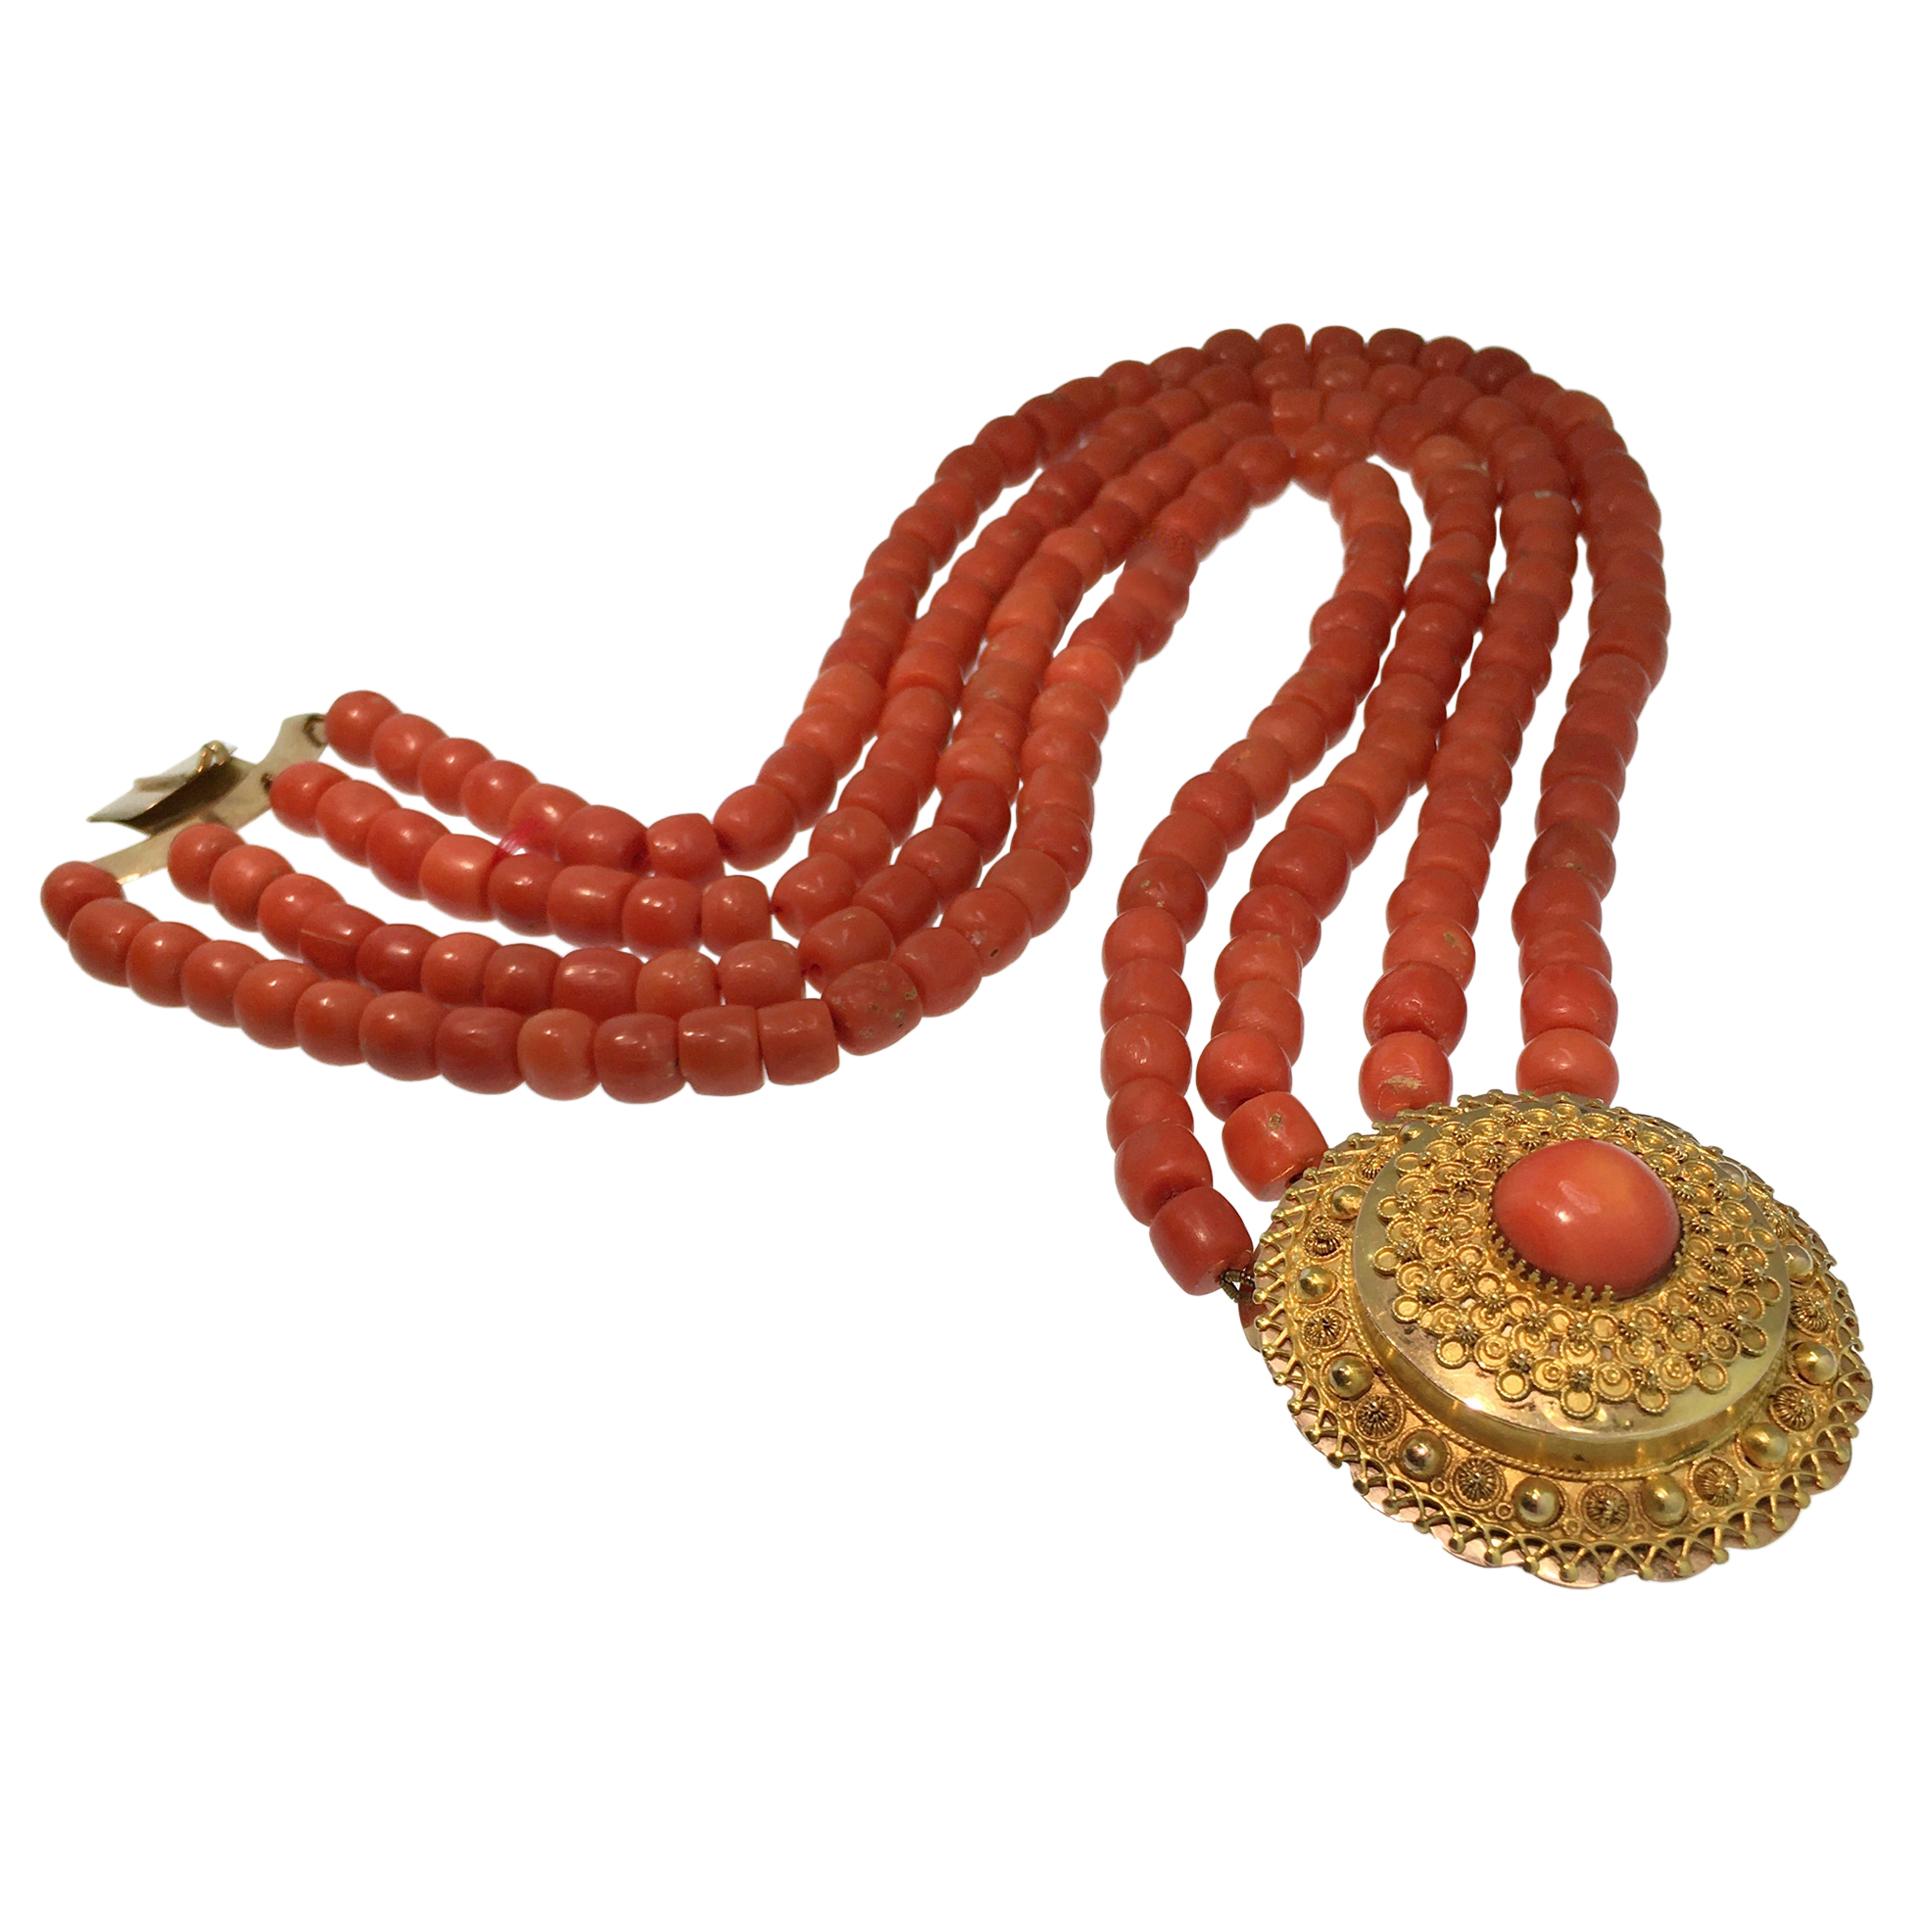 Antique Coral, Necklace, Gold, 1880, Dutch Costume Jewelry